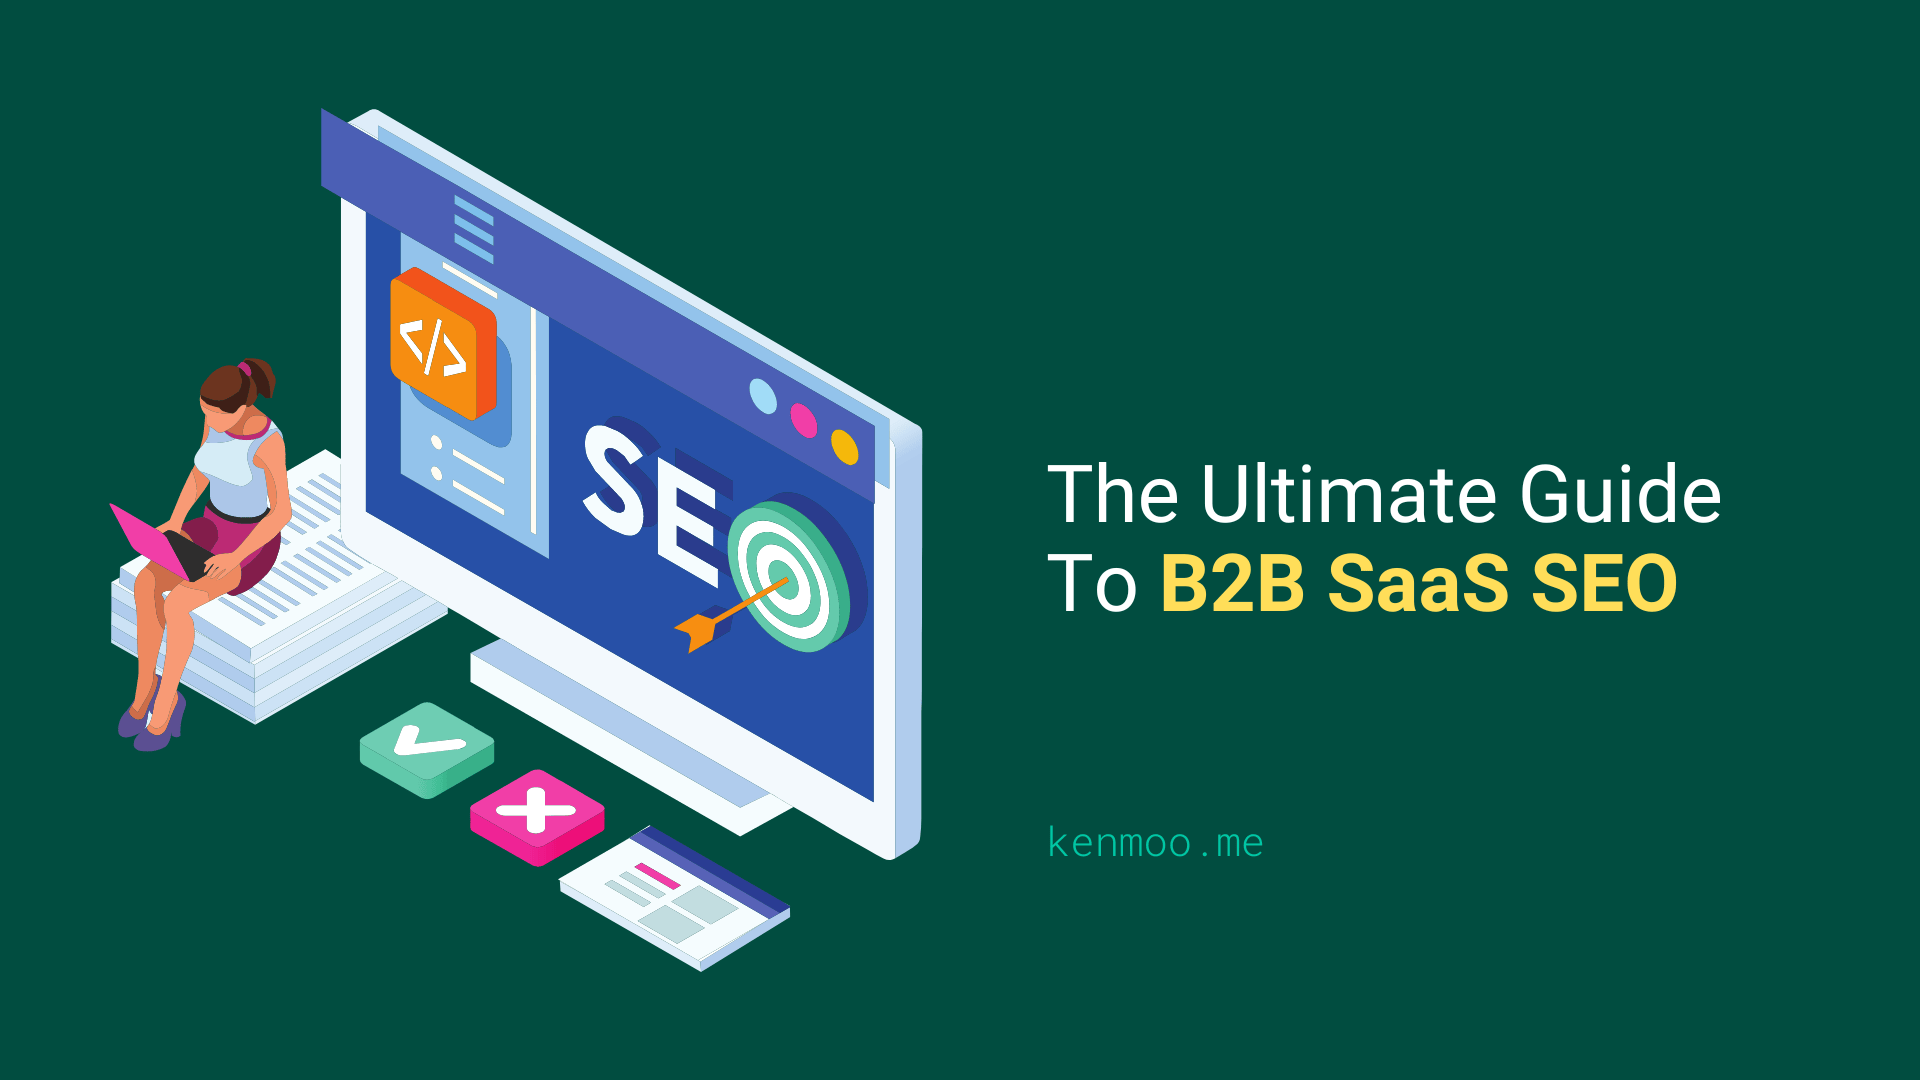 The Ultimate Guide To B2B SaaS SEO